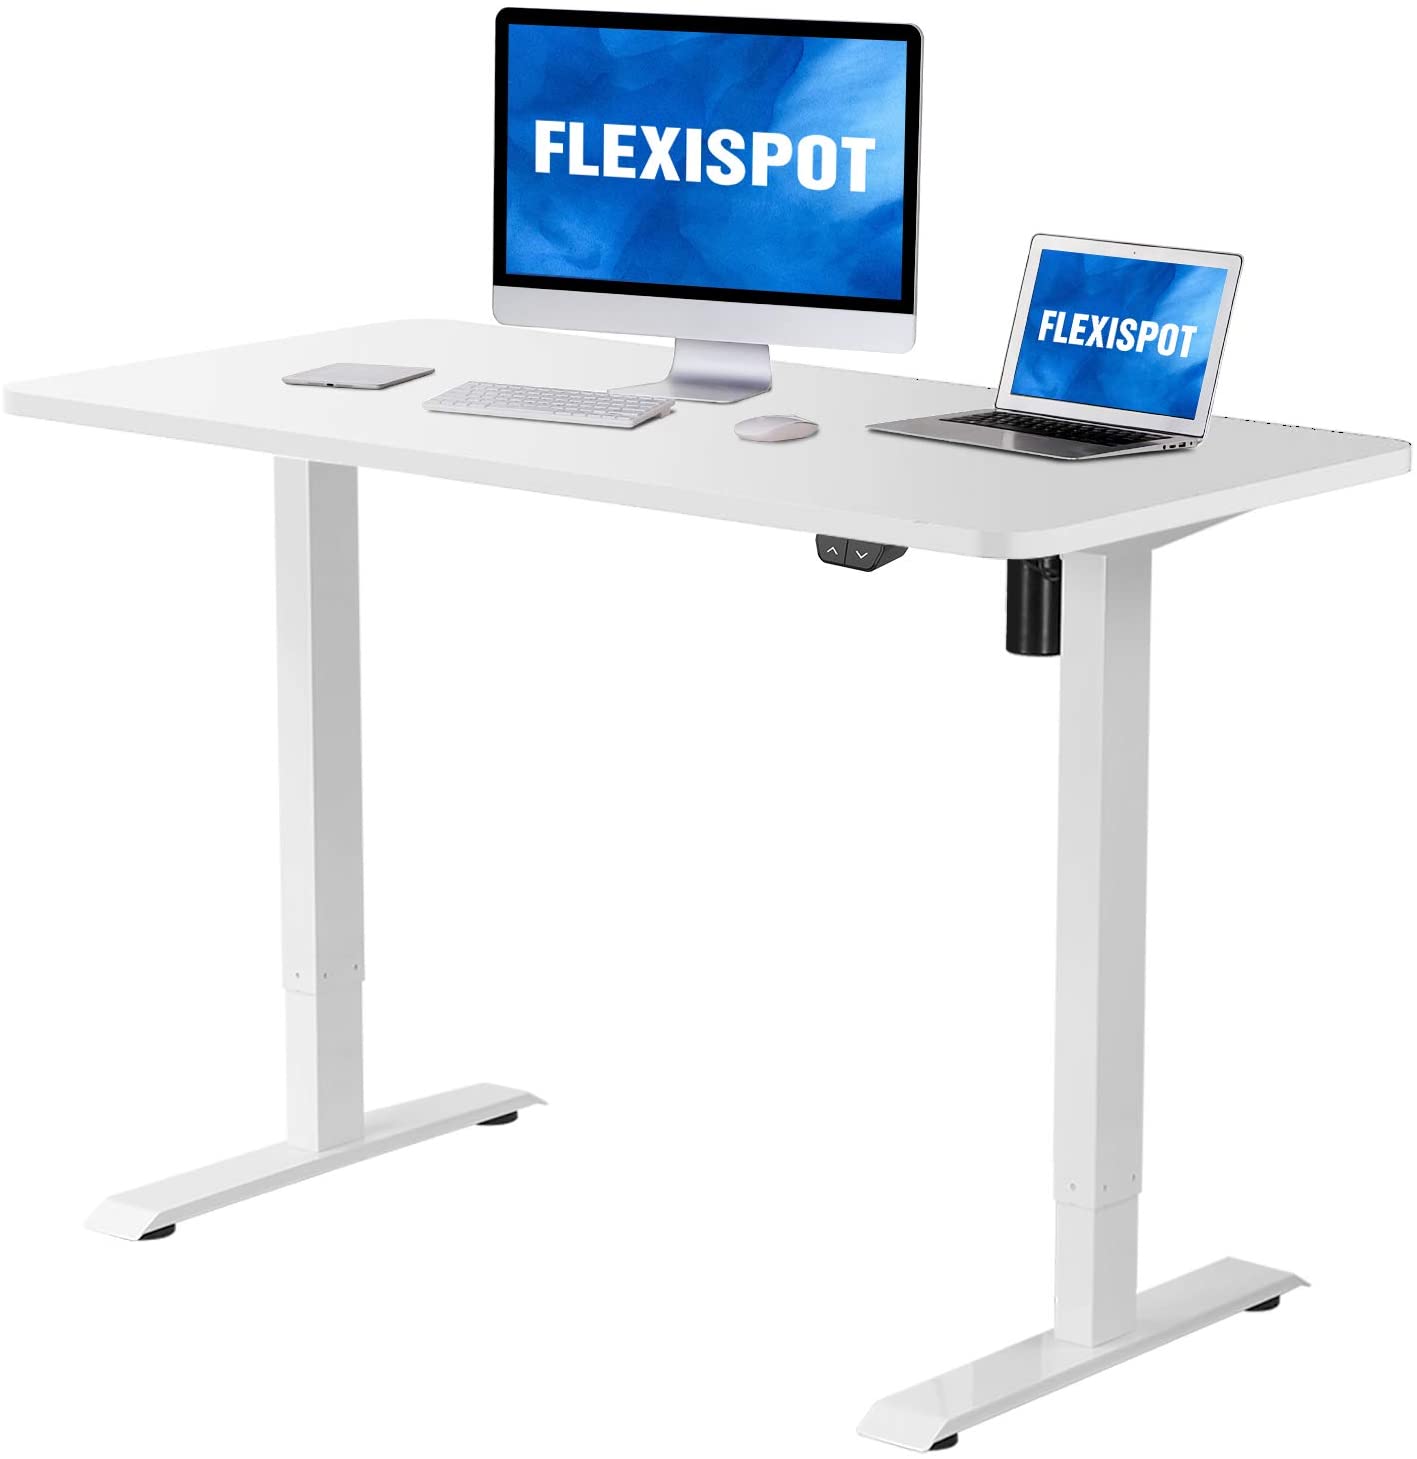 Flexispot Electric Standing Desk Height Adjustable Desk, 48 x 30 Inches Sit Stand Desk